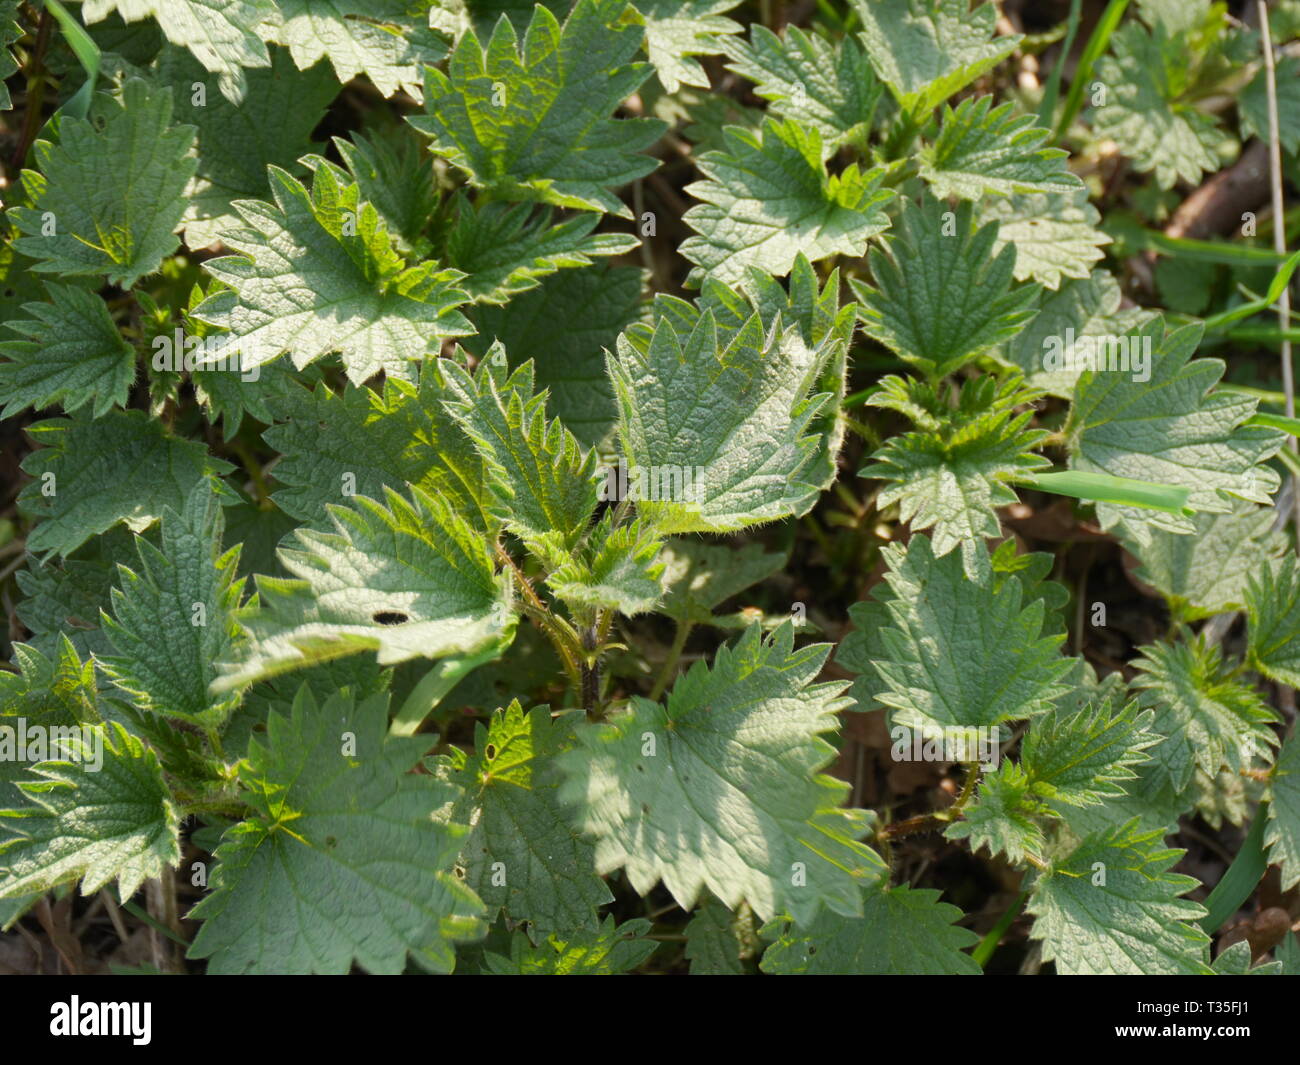 Top closeup (macro) view of young dense stinging nettle leaves. Stock Photo